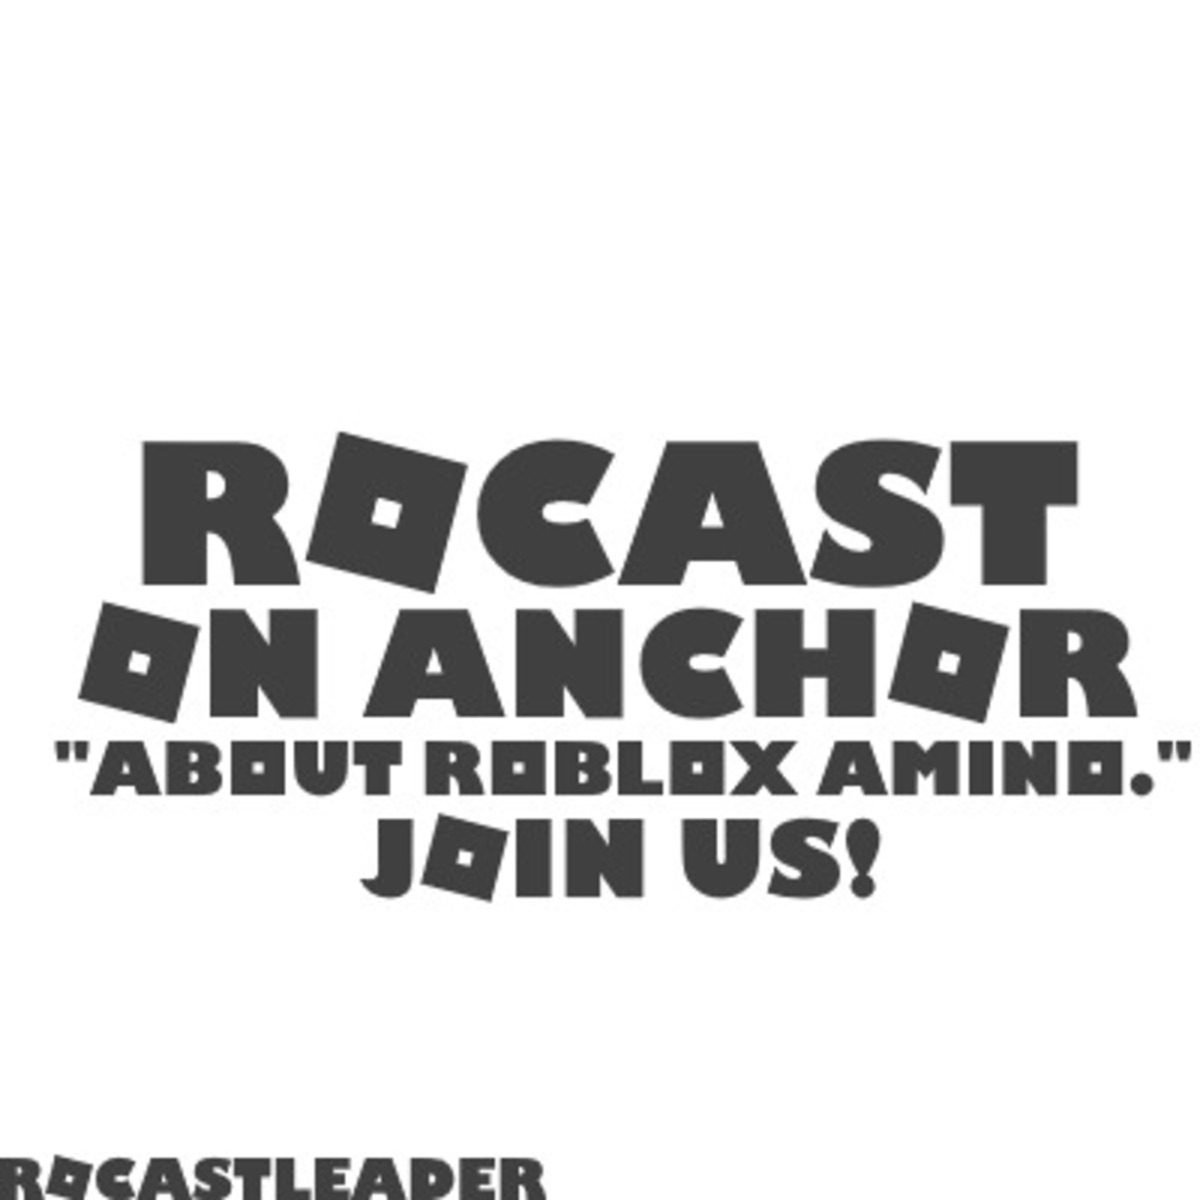 Related Rocast About Roblox Amino Podcast Podtail - if me and tom owned roblox roblox amino